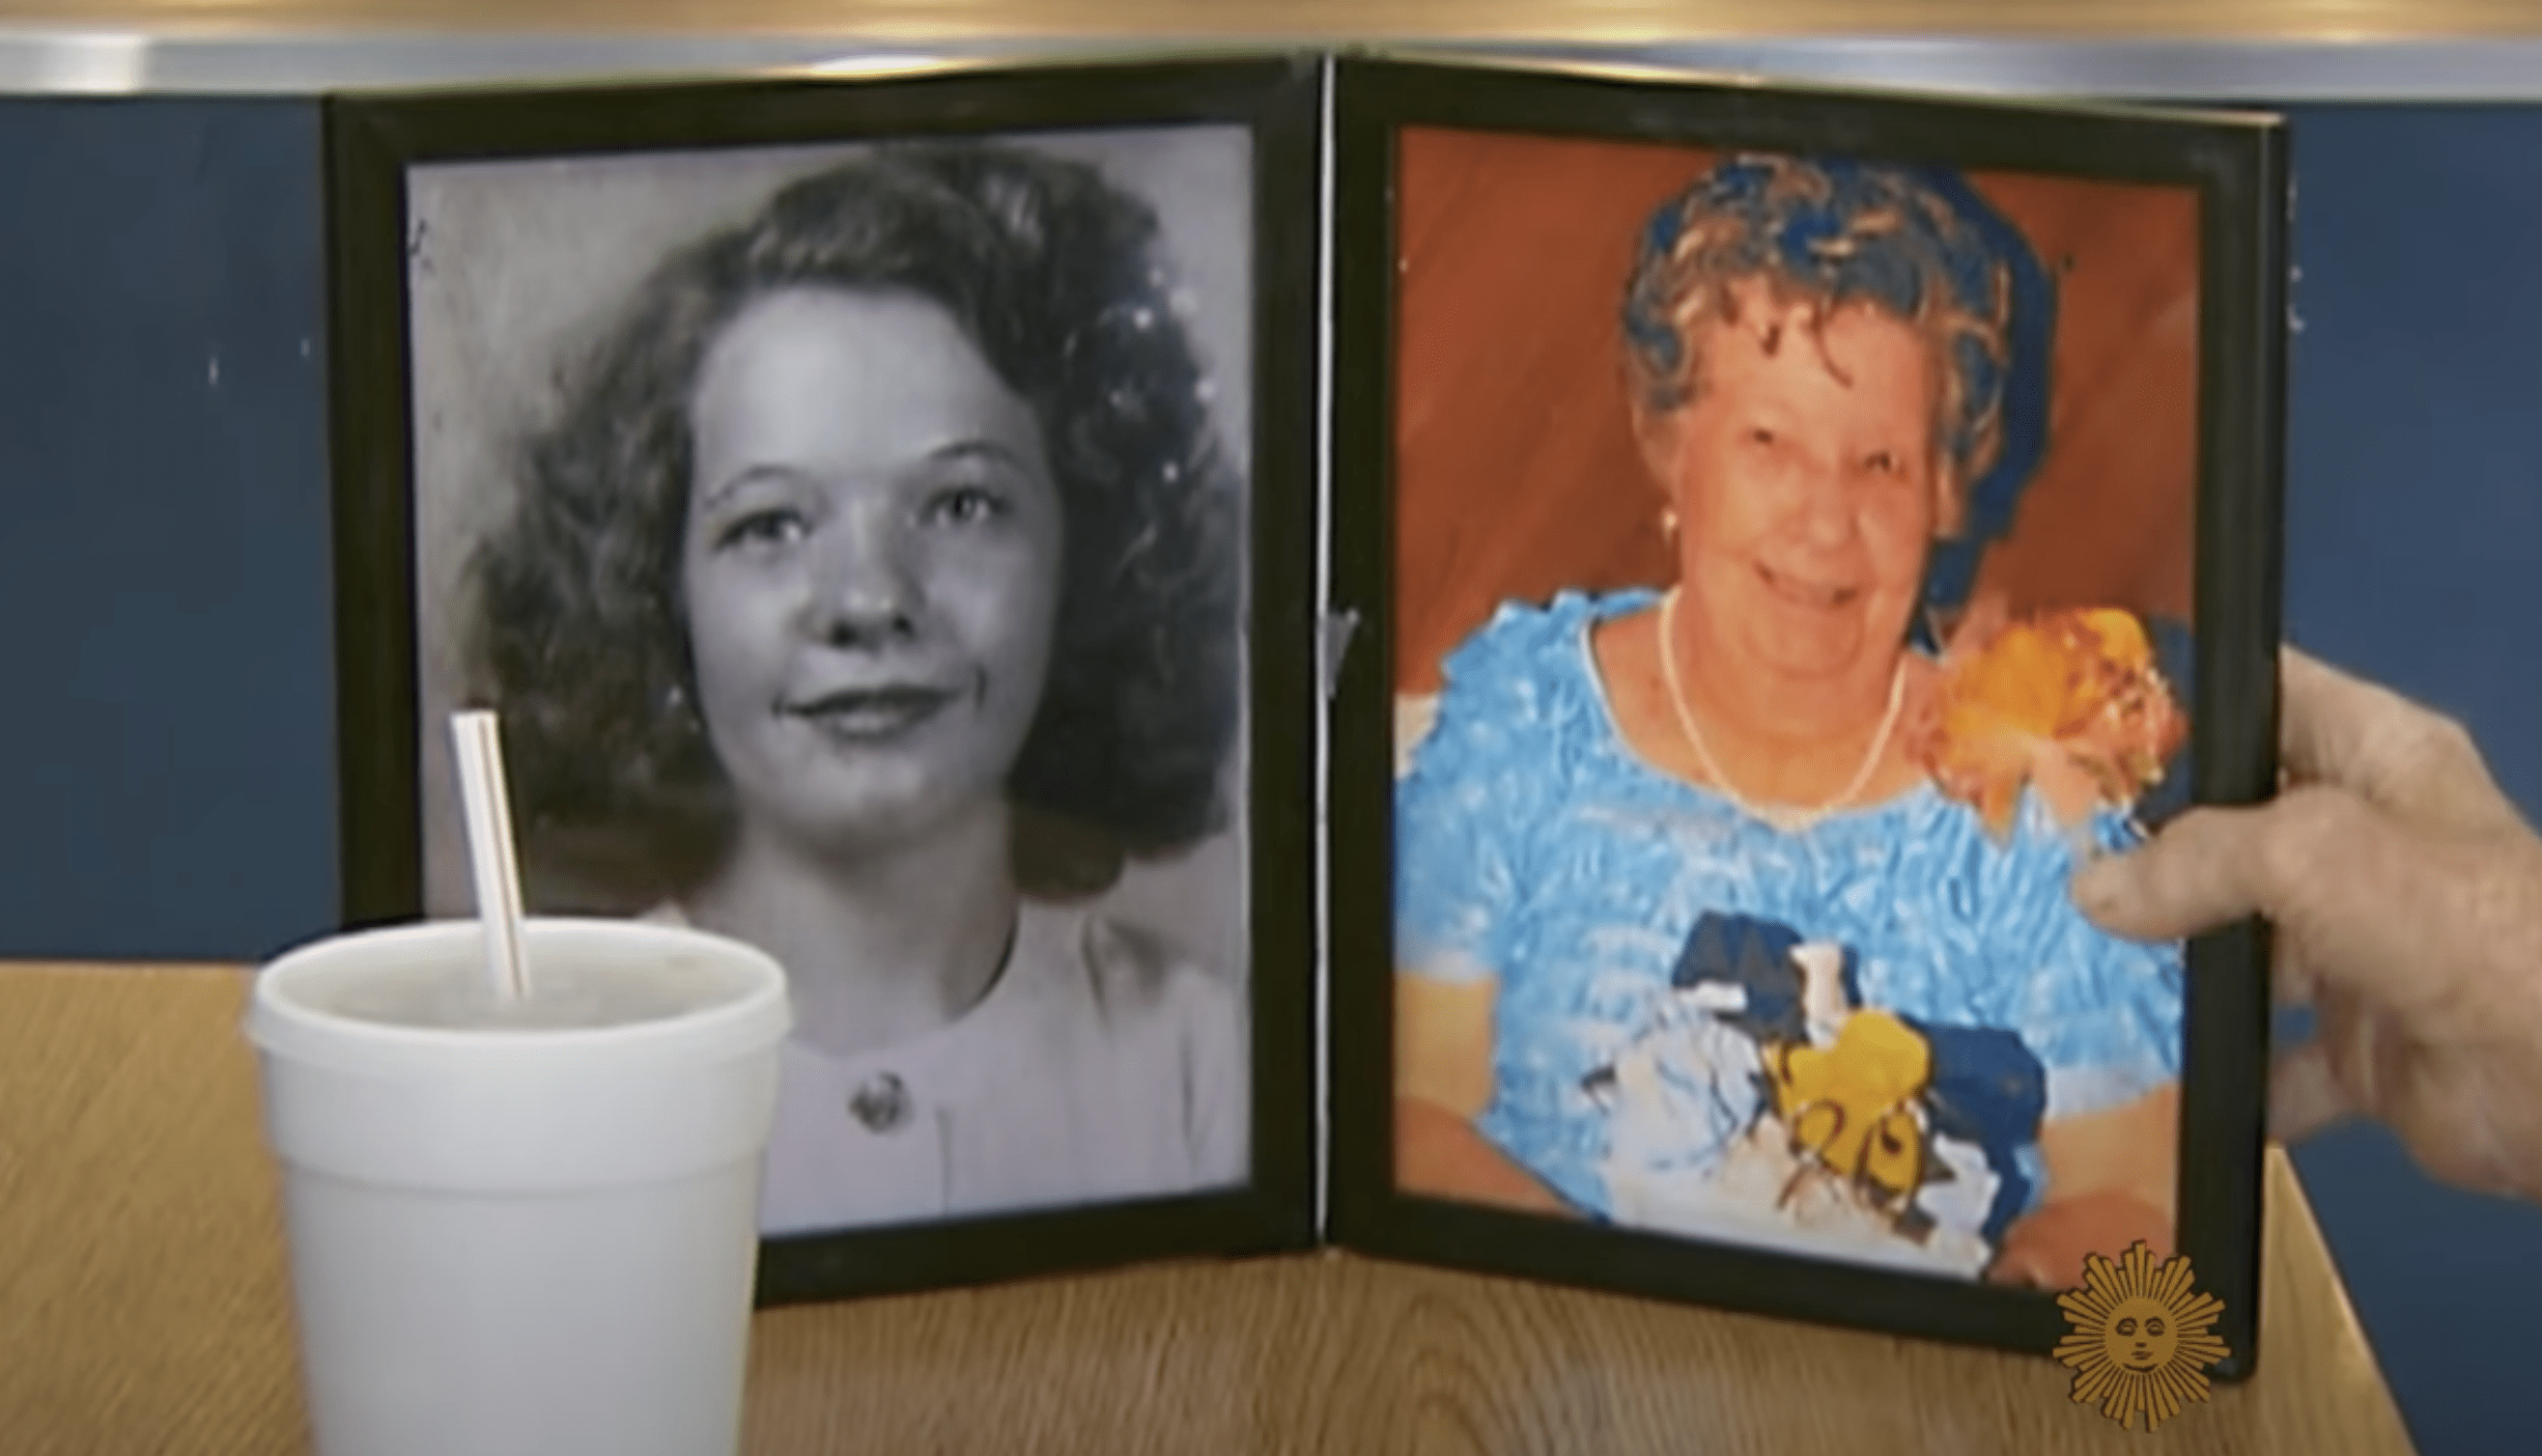 Pictures of 93-year-old retired Mechanic, Clarence Purvis's wife, Carolyn Todd | Source: YouTube/CBS Sunday Morning